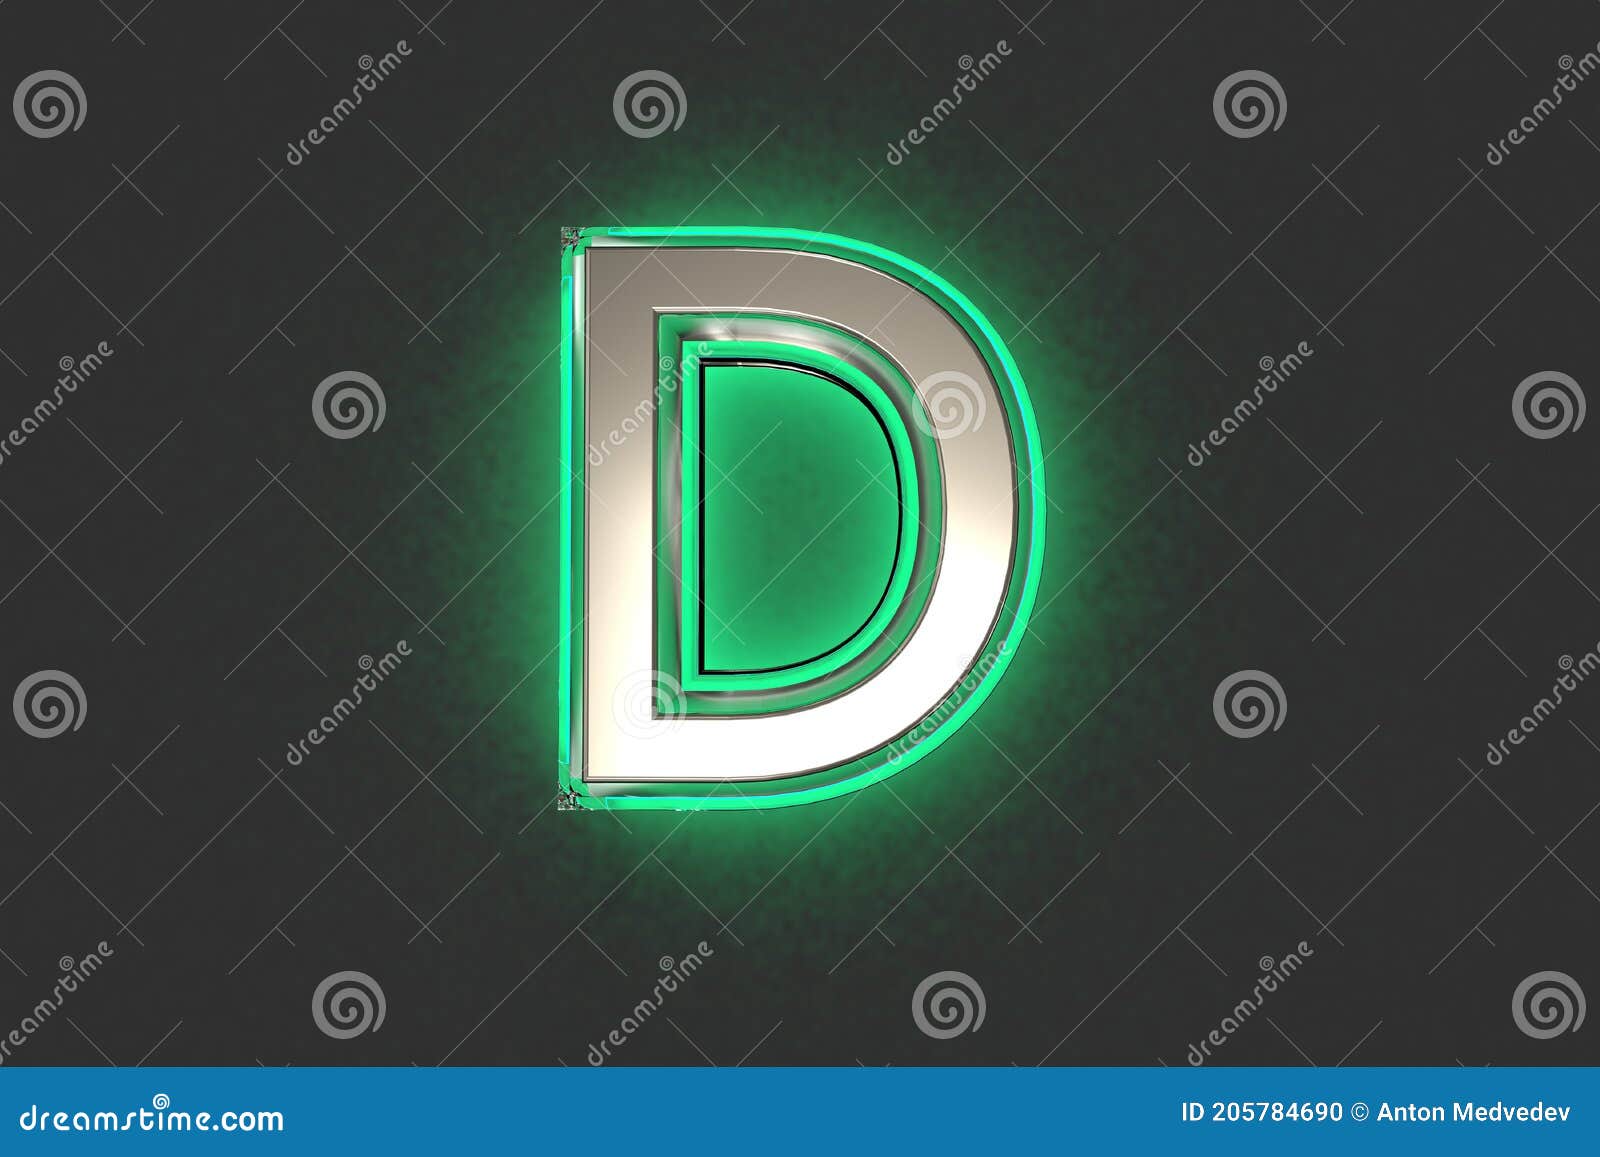 Silver Metalline with Emerald Outline and Green Noisy Backlight ...